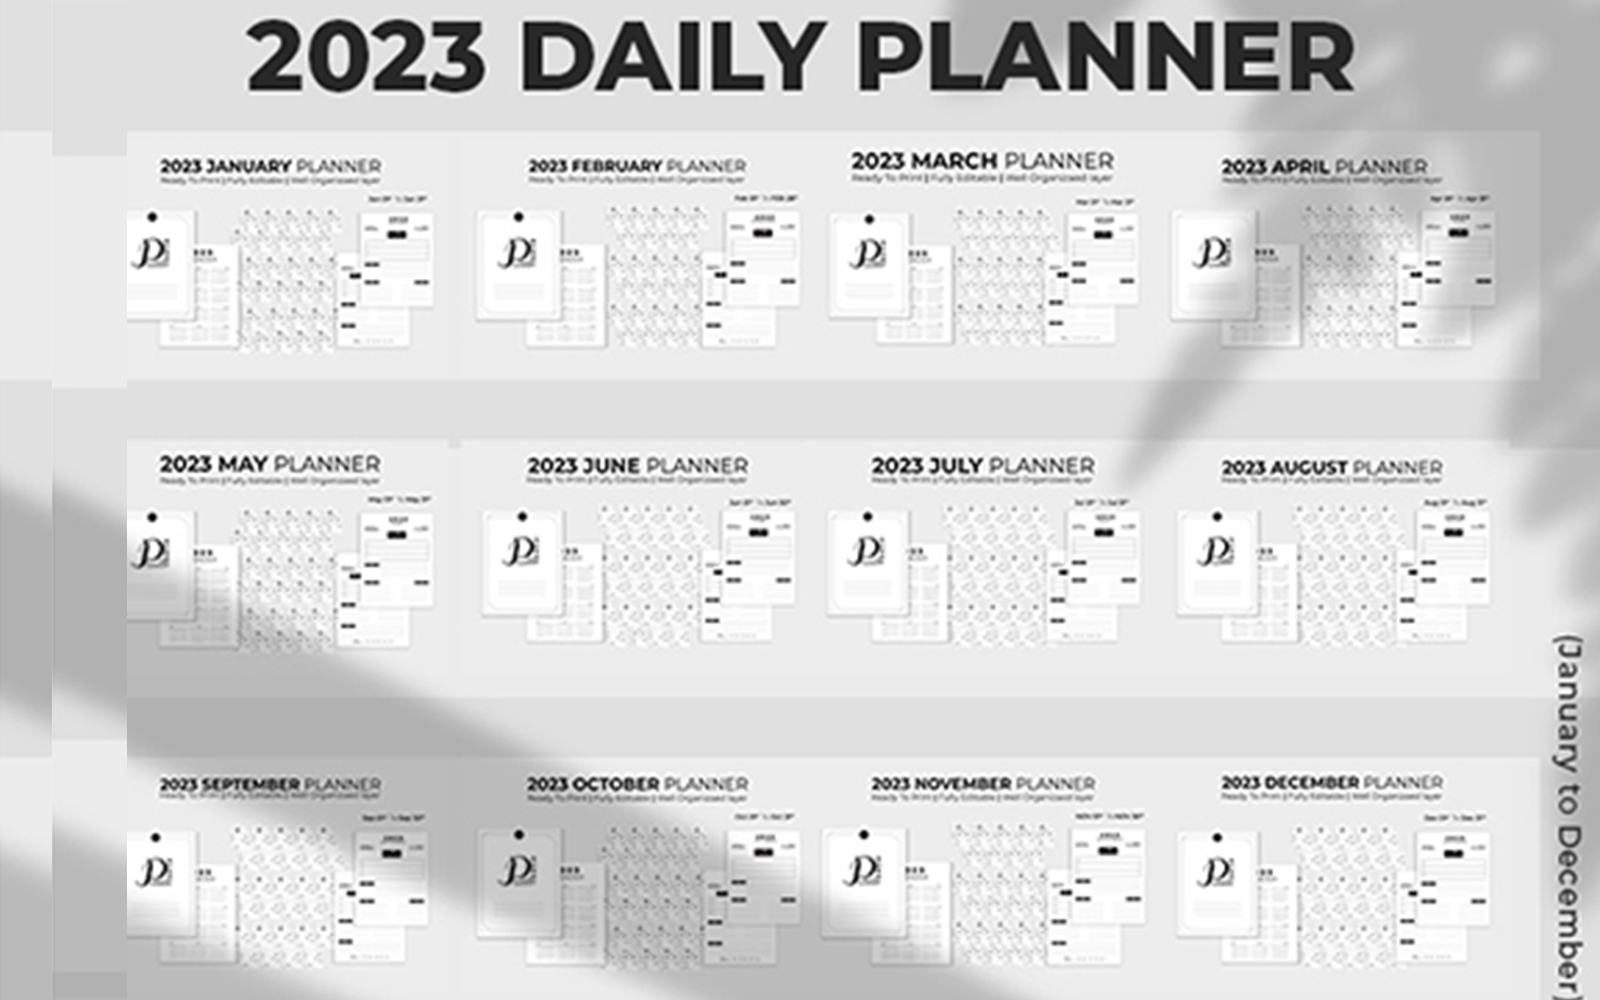 Template #312106 Daily Planner Webdesign Template - Logo template Preview